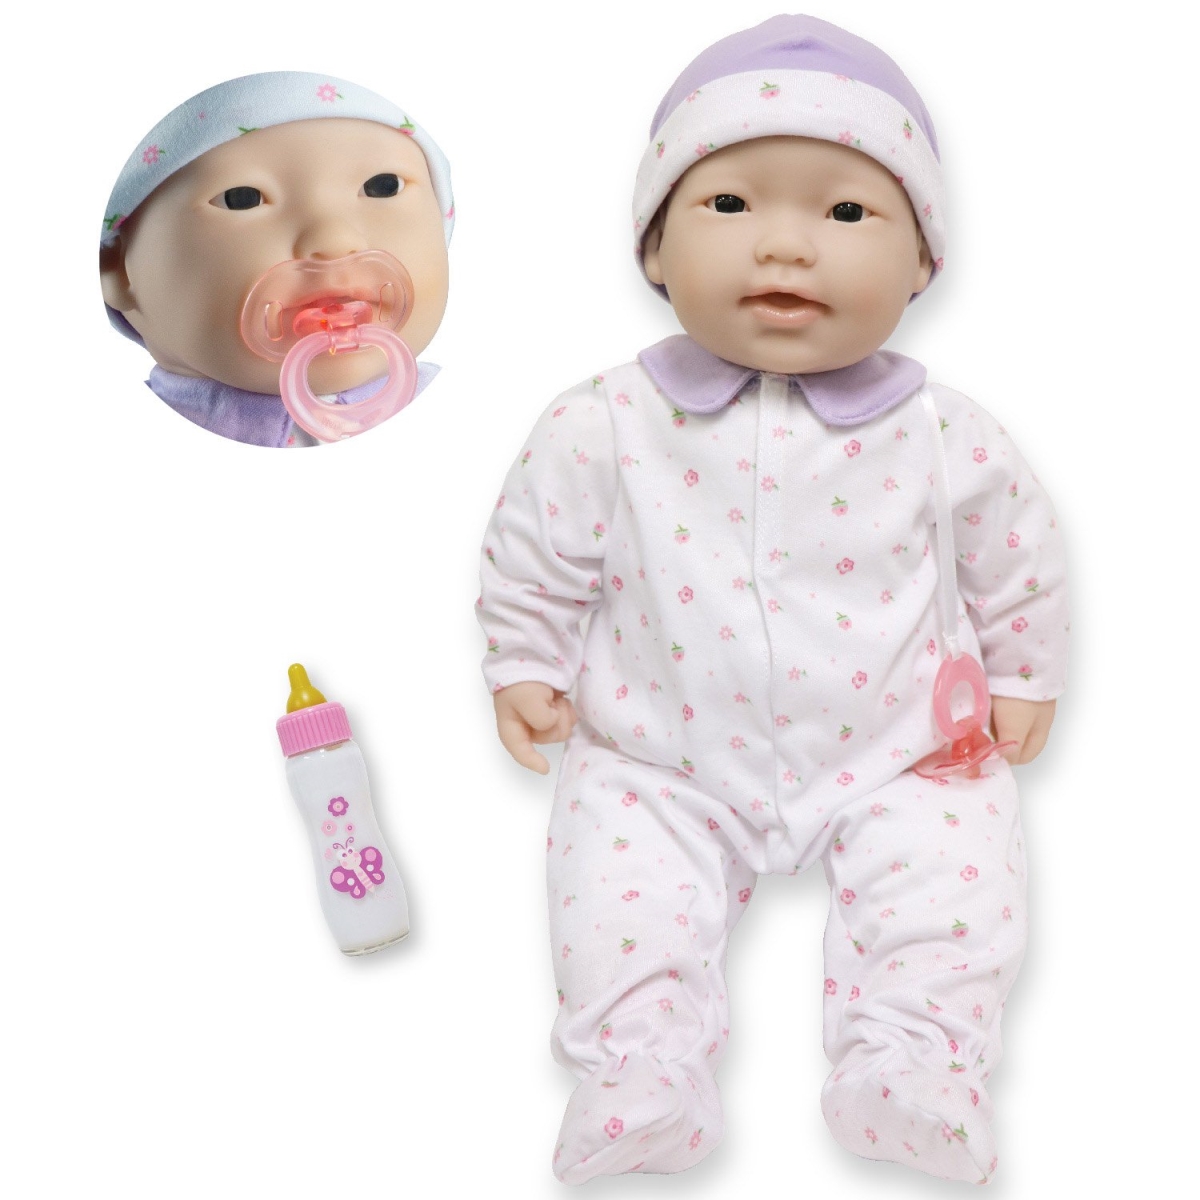 Picture of La Baby Play Doll - 20 in. Asian Soft Body Baby Doll in Baby Outfit Purple with Pacifier